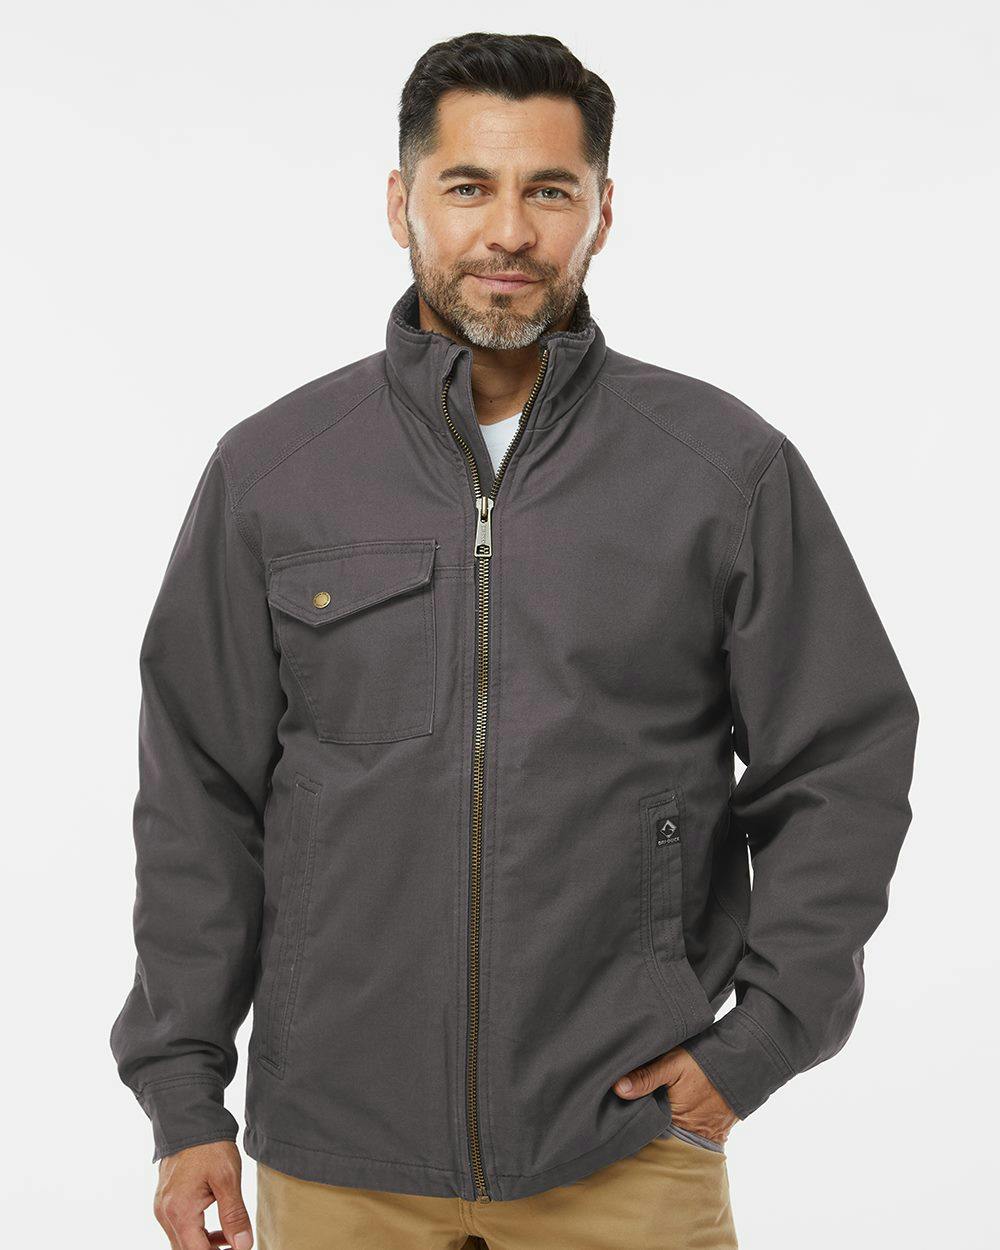 Image for Endeavor Canyon Cloth™ Canvas Jacket with Sherpa Lining - 5037